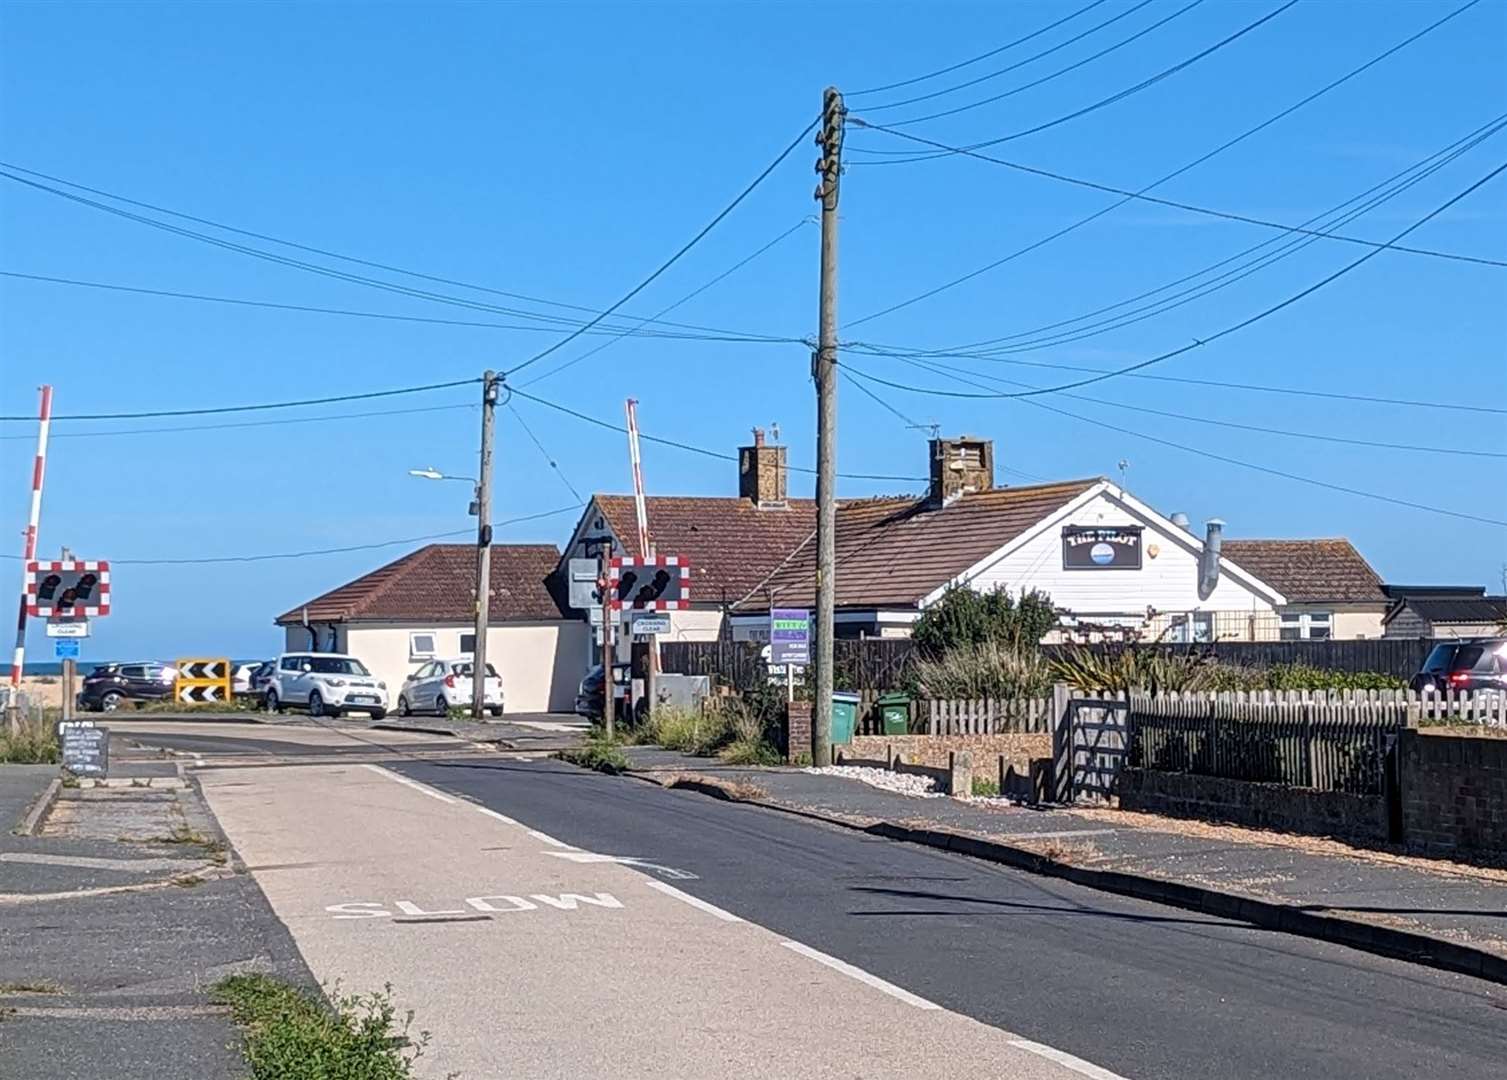 The Pilot Inn at Lydd-on-Sea sits on the edge of the shingle expanse of Dungeness